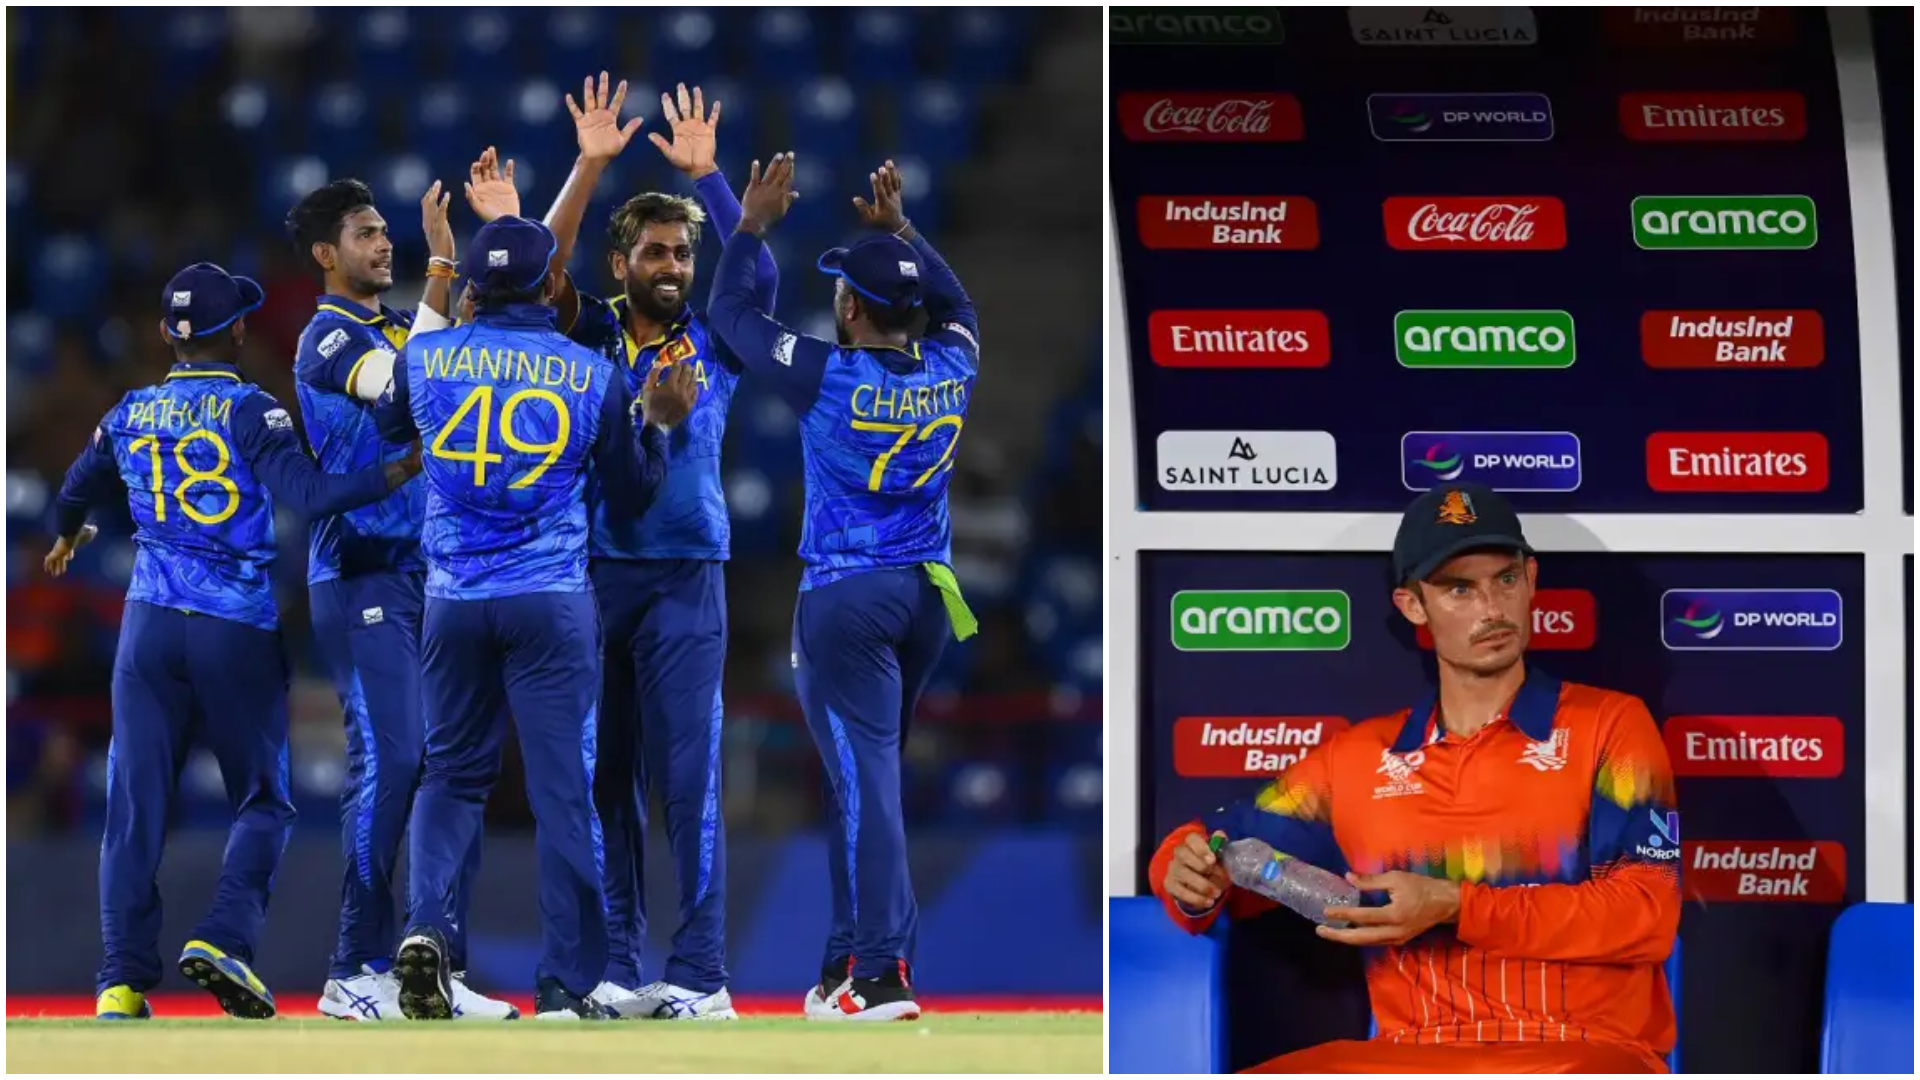 Despite their efforts, the Netherlands couldn't recover from their early setbacks and fell short of the target, giving Sri Lanka a significant win.